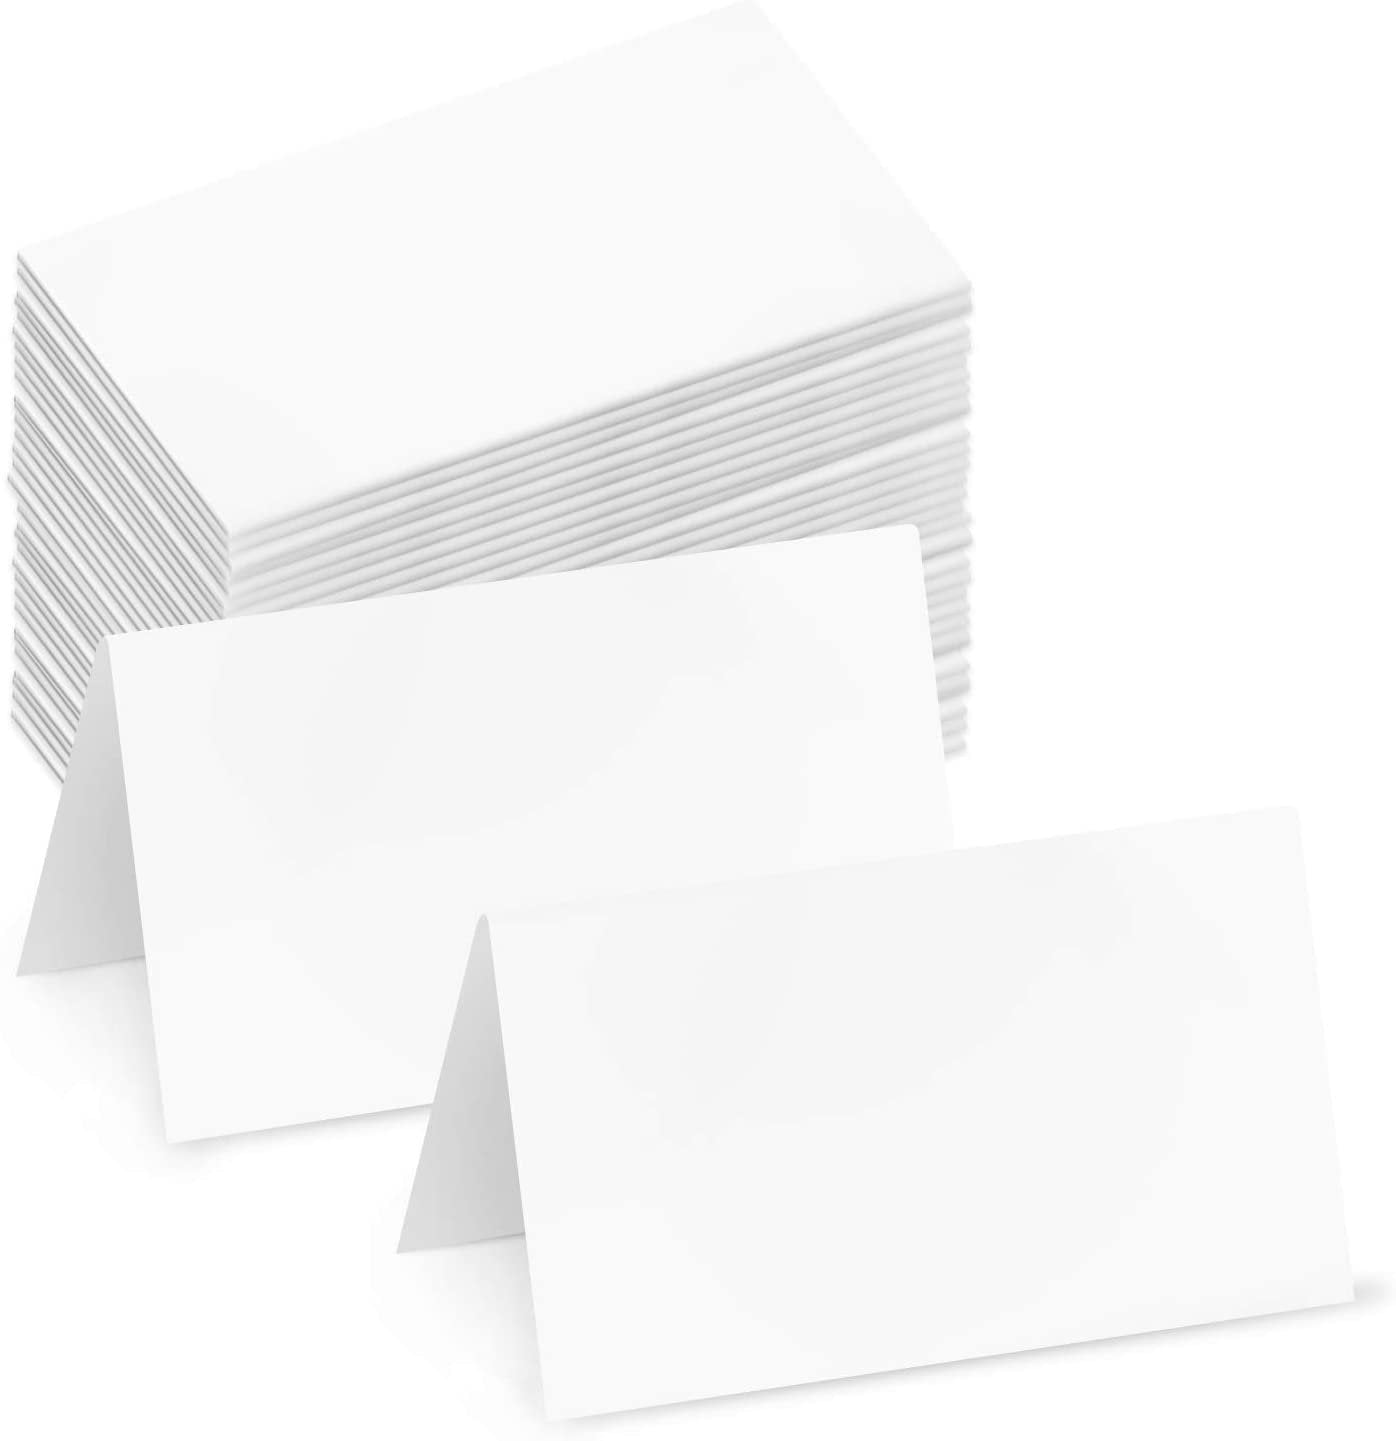 80lb | 3.5 x 2 Tags Dinner Party Baby Showers 216gsm Seating Cards 200 per Pack Tent Cards for Wedding Blank White Table Place Cards Christmas 